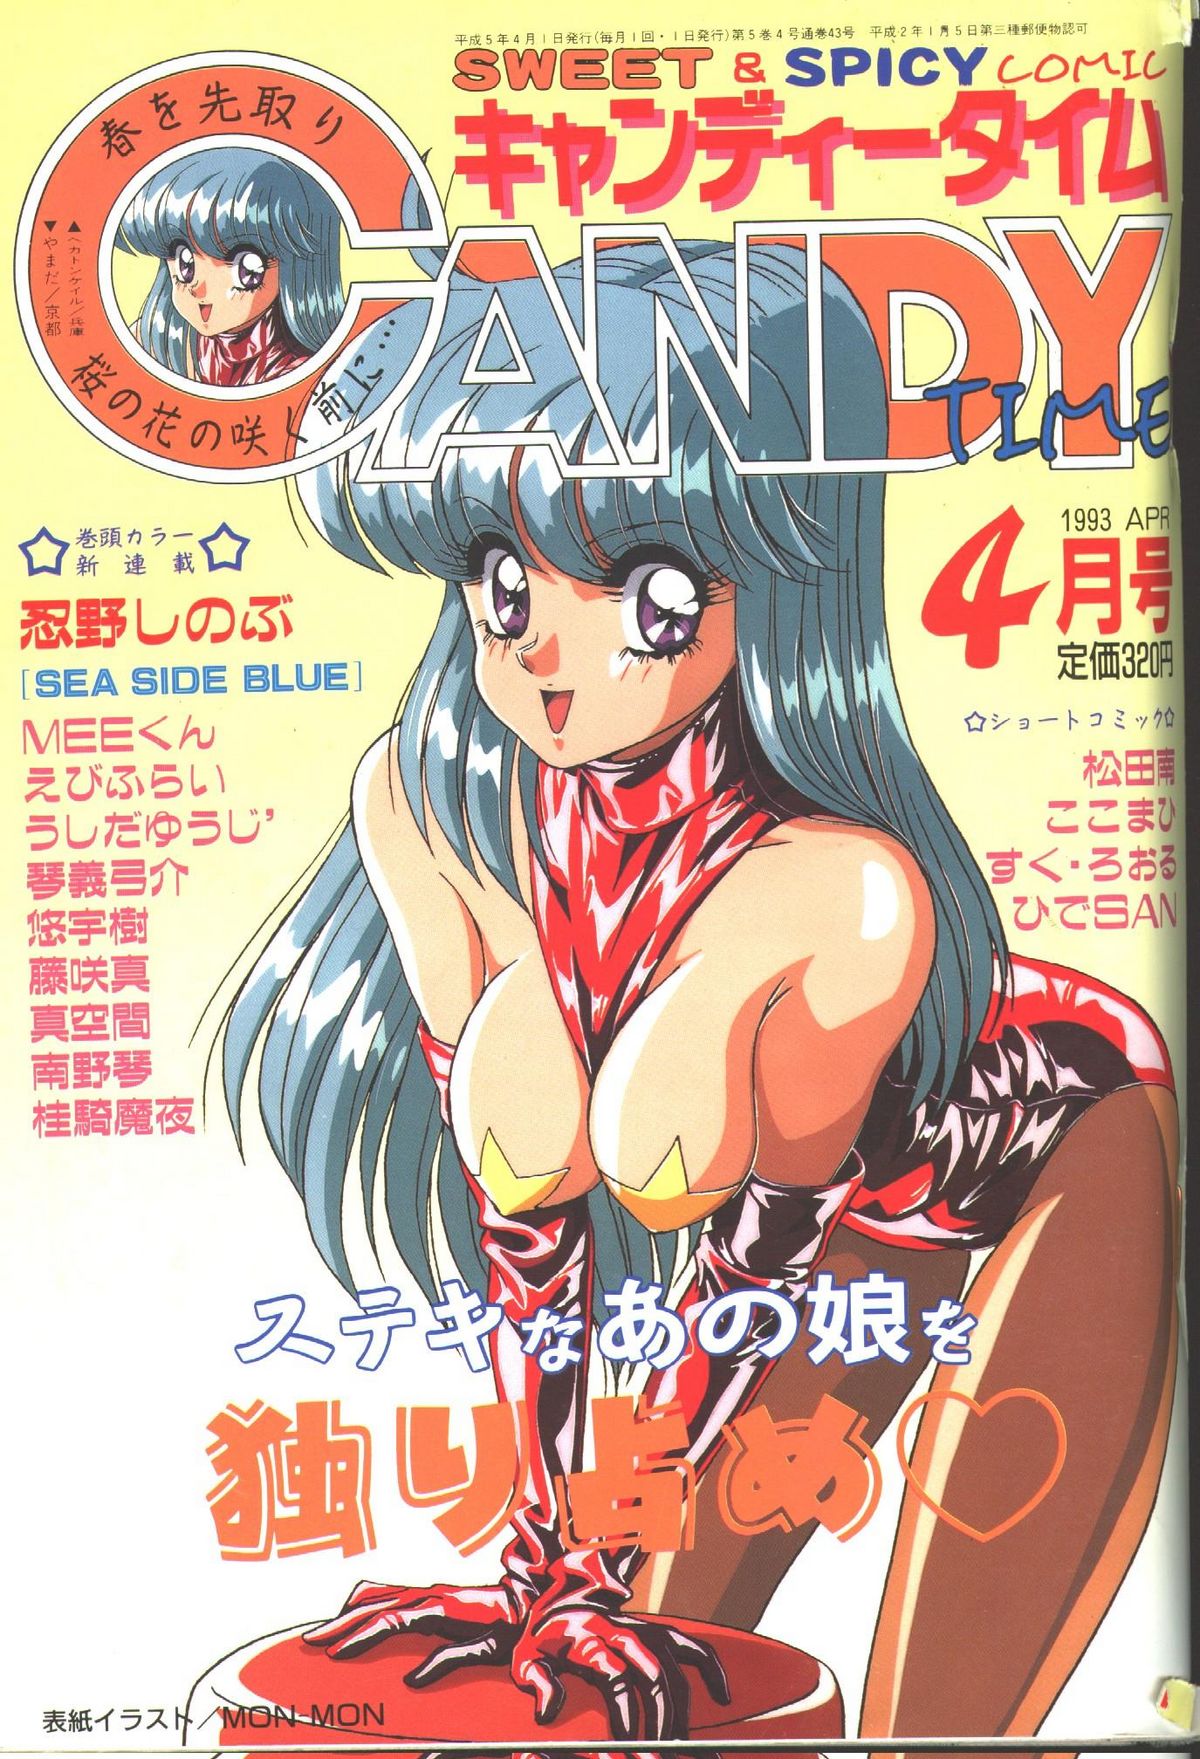 Candy Time 1993-04 [Incomplete] キャンディータイム 1993年04月号 [不完全]